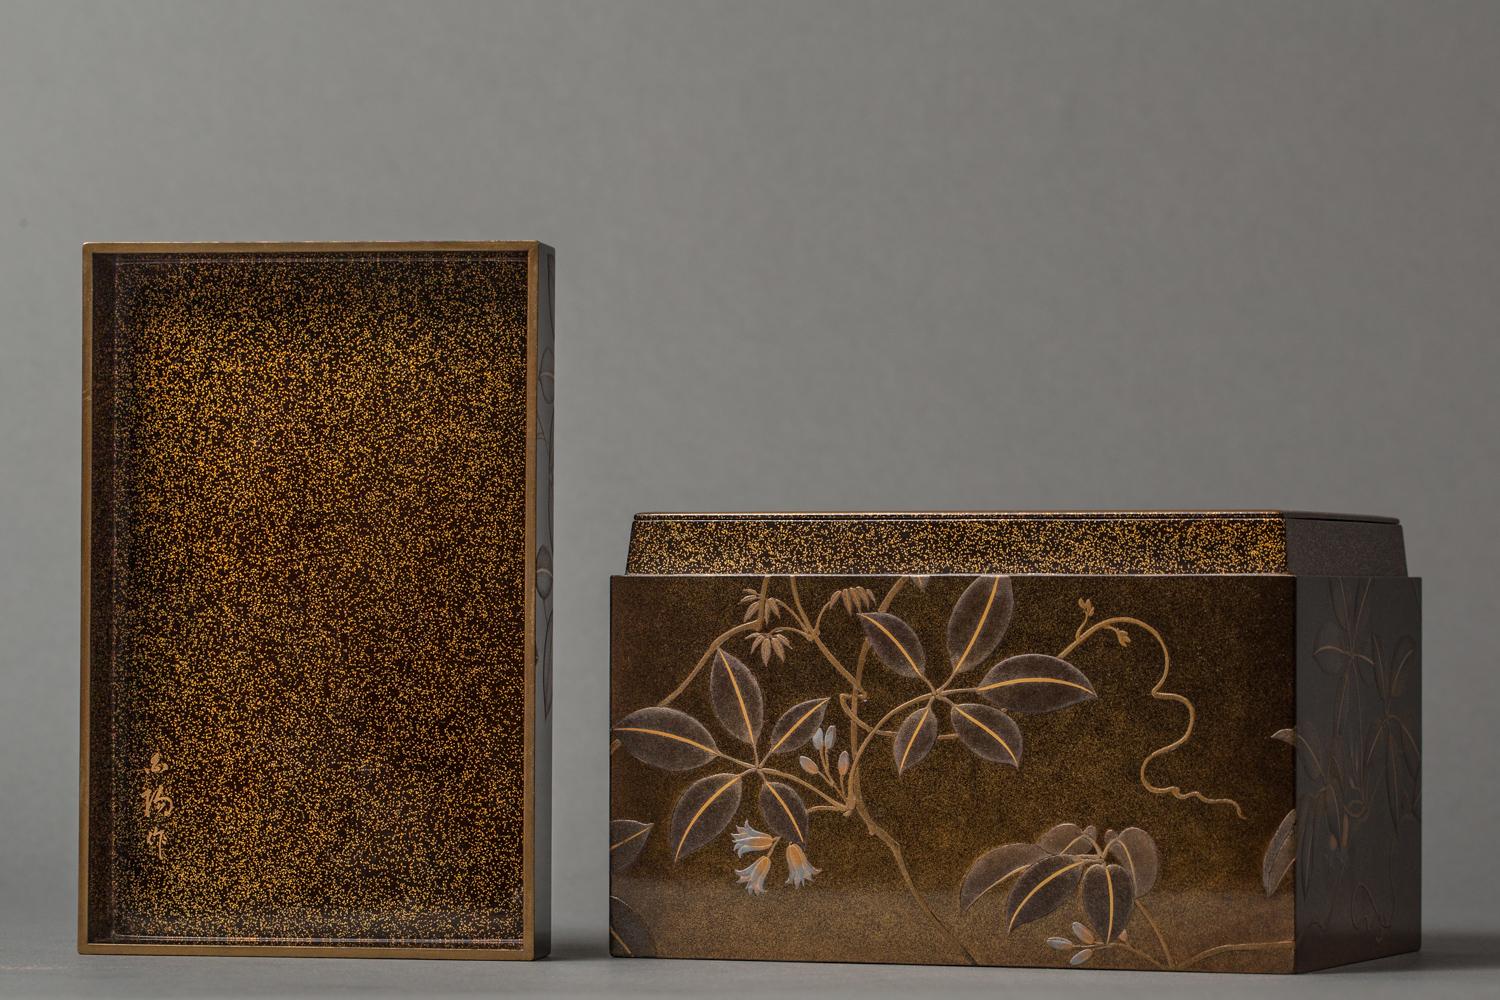 Meiji period lacquer box with nashiji ground interior with tray that has an opening for the tea whisk. Comes with silk period jacket with ties and sugi wood collector's box. Artist signature reads: Hakuyo.